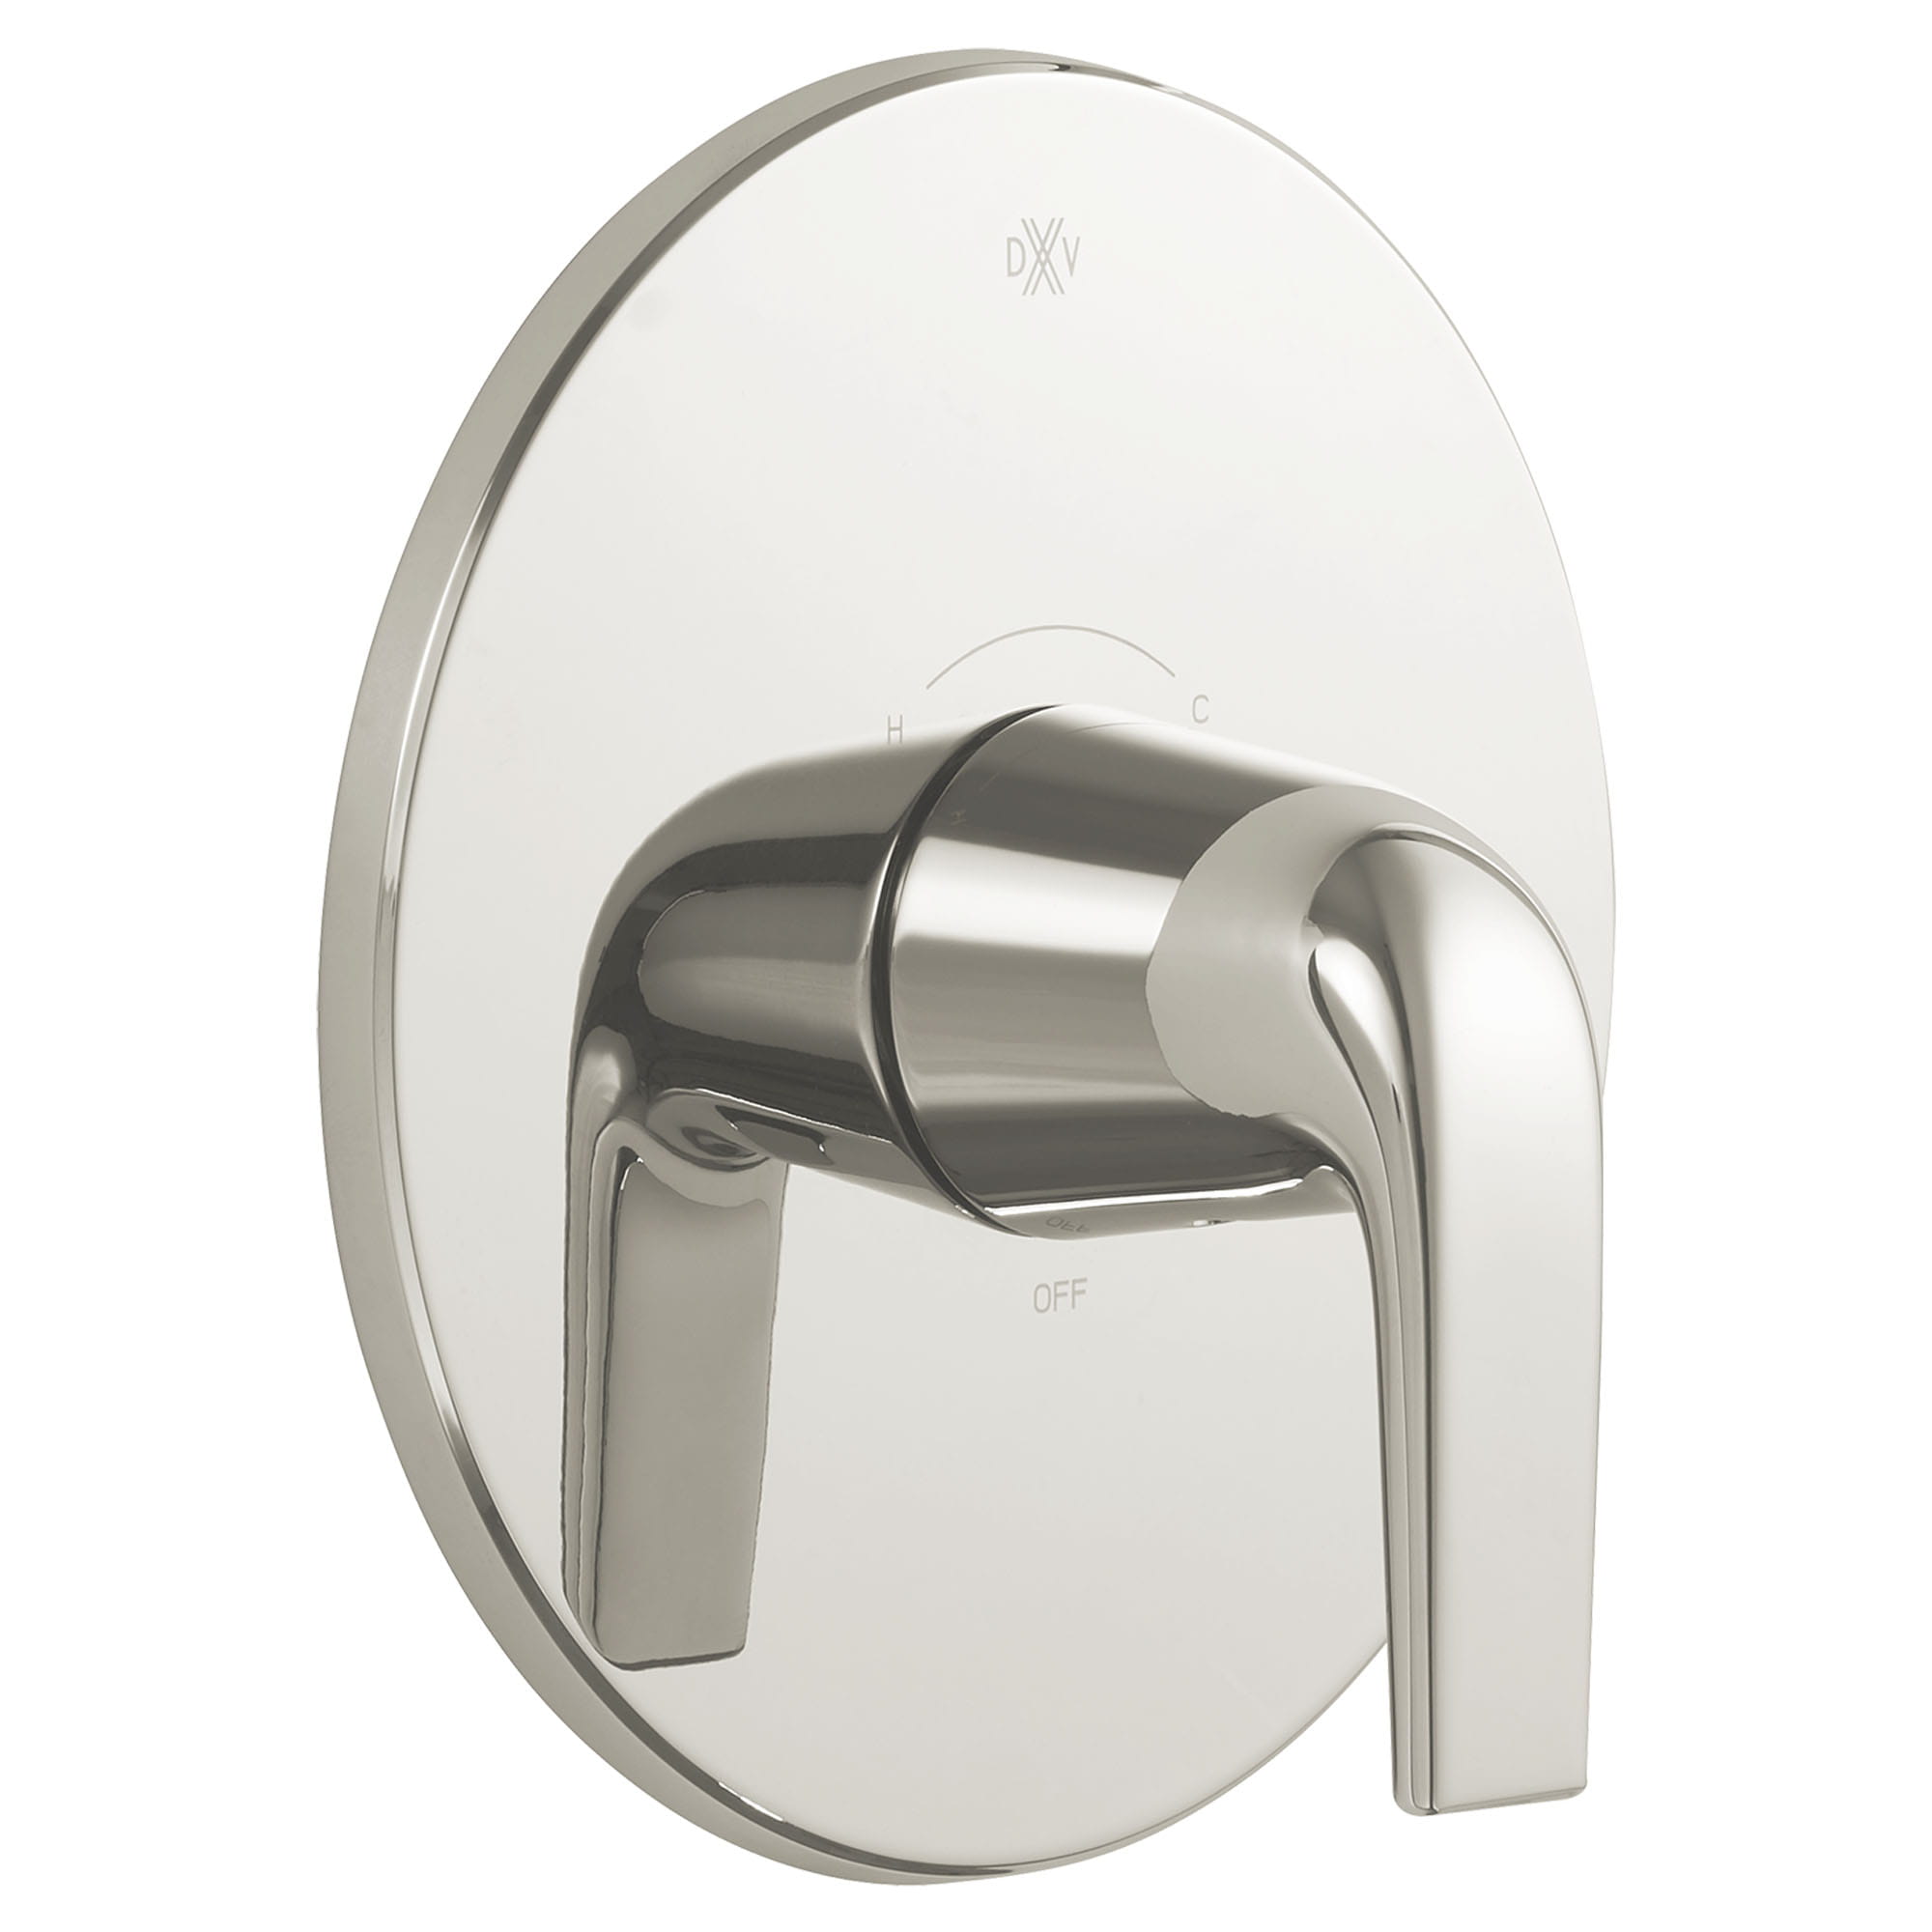 DXV MODULUS ½-INCH OR ¾-INCH THERMOSTATIC VALVE TRIM